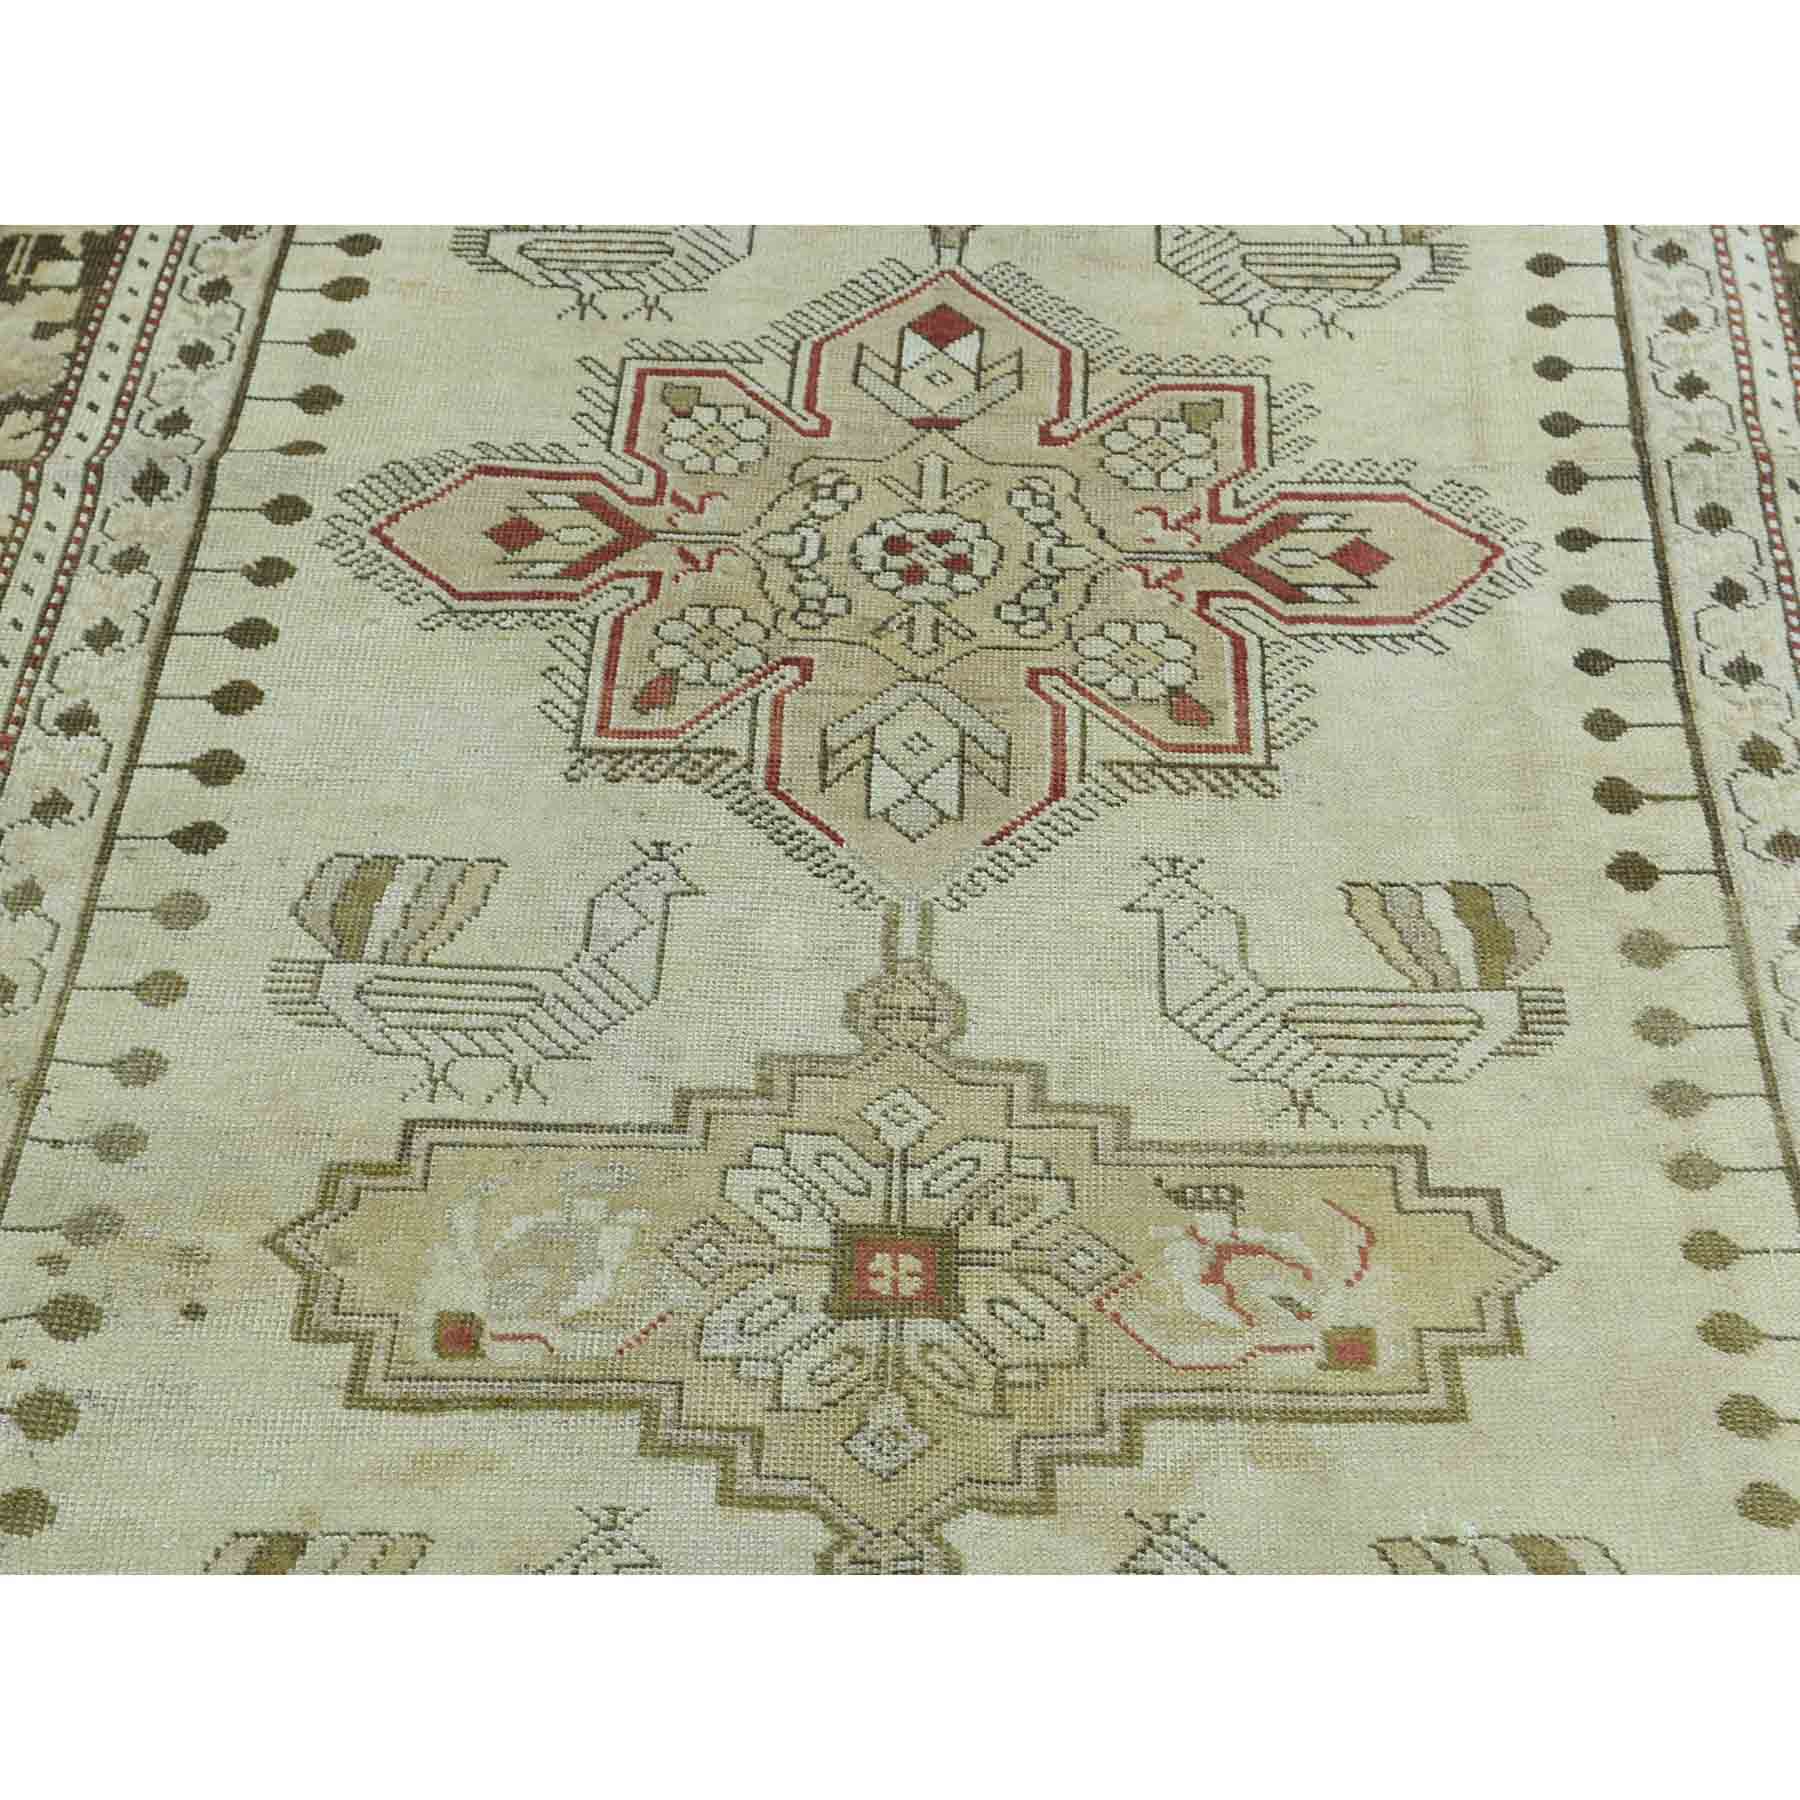 Antique-Hand-Knotted-Rug-165890